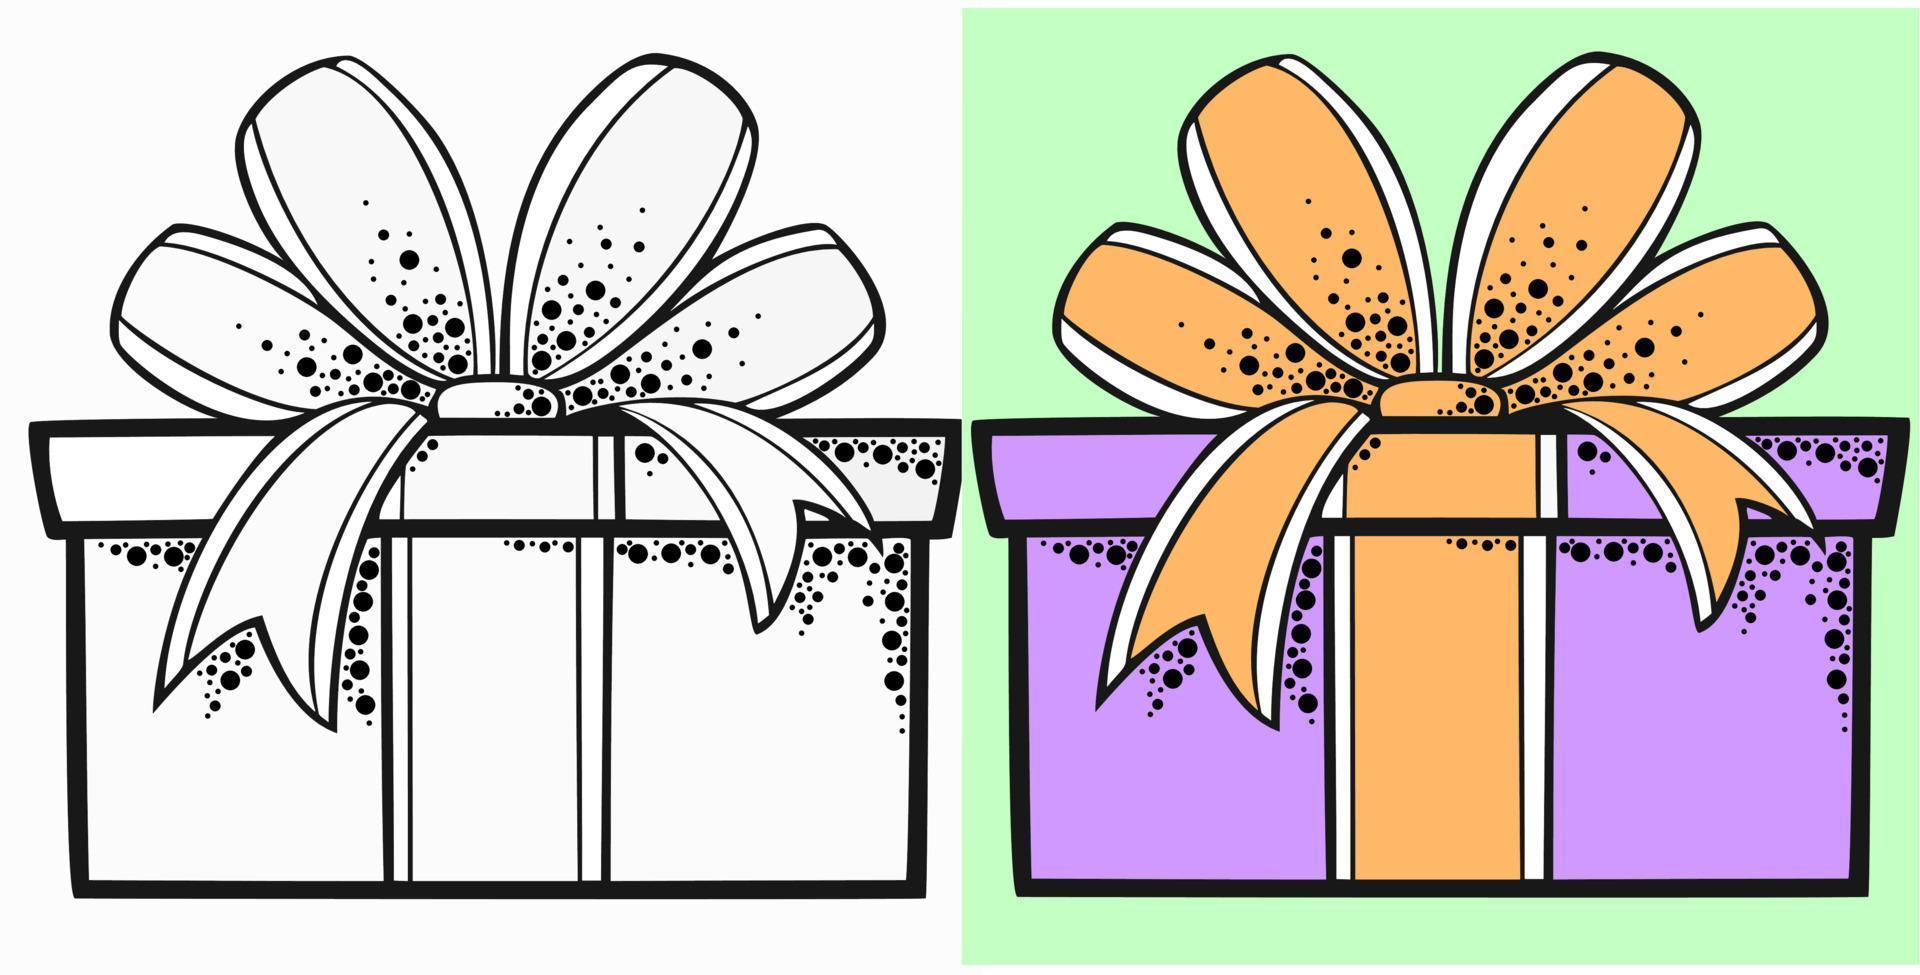 A set of festive gift boxes with a bow and ribbon, monochrome illustration and color vector